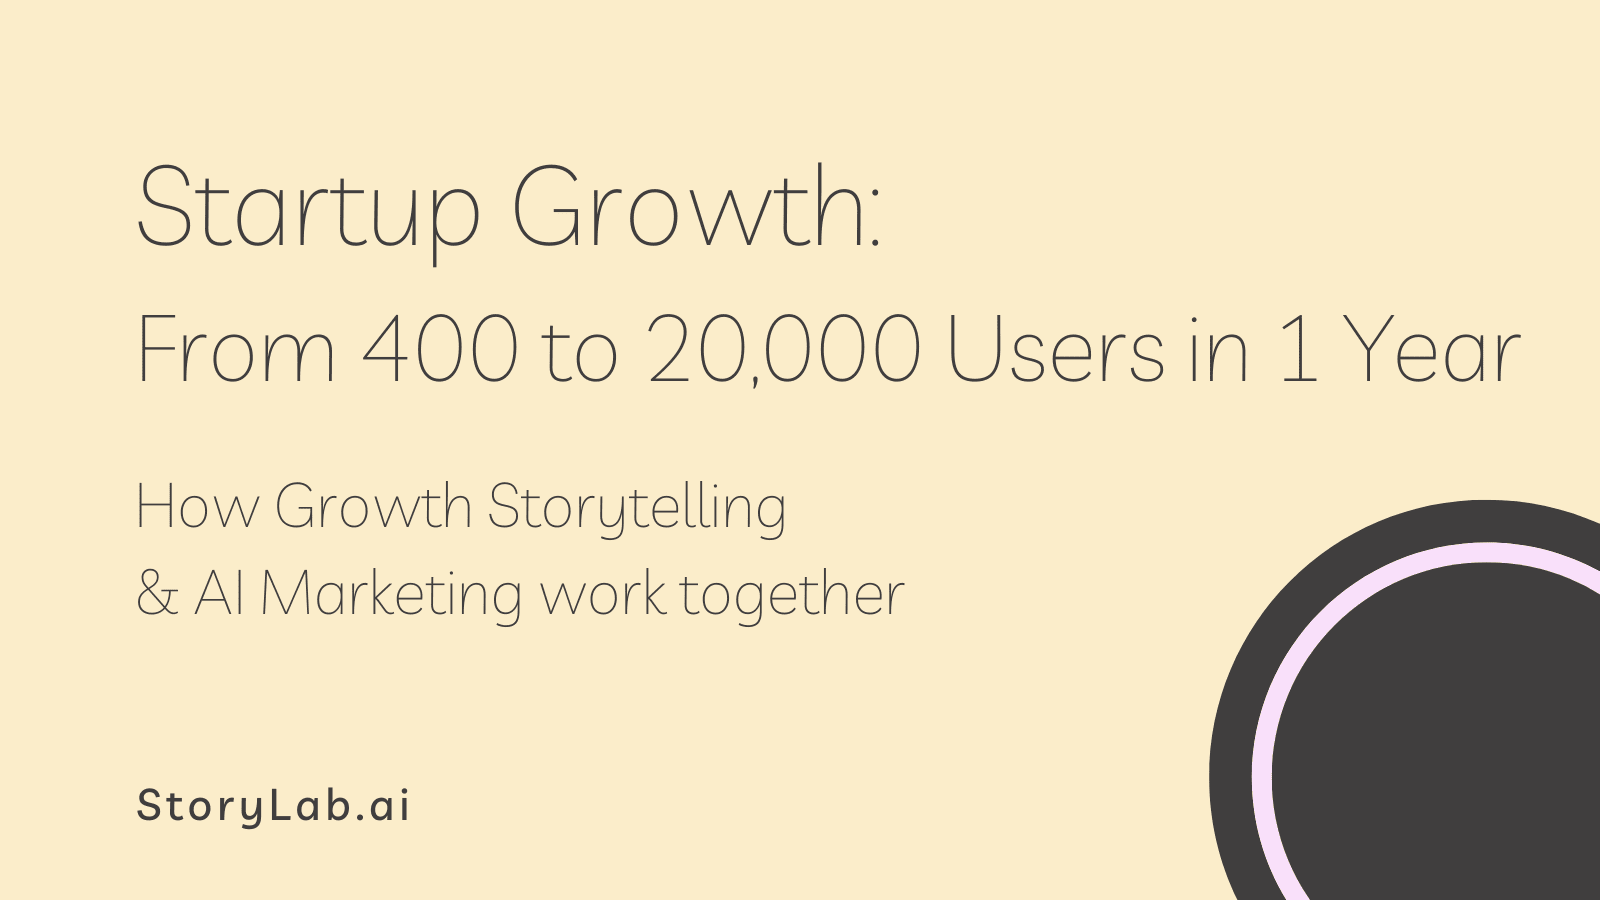 Startup Growth From 400 to 20,000 Users in 1 Year